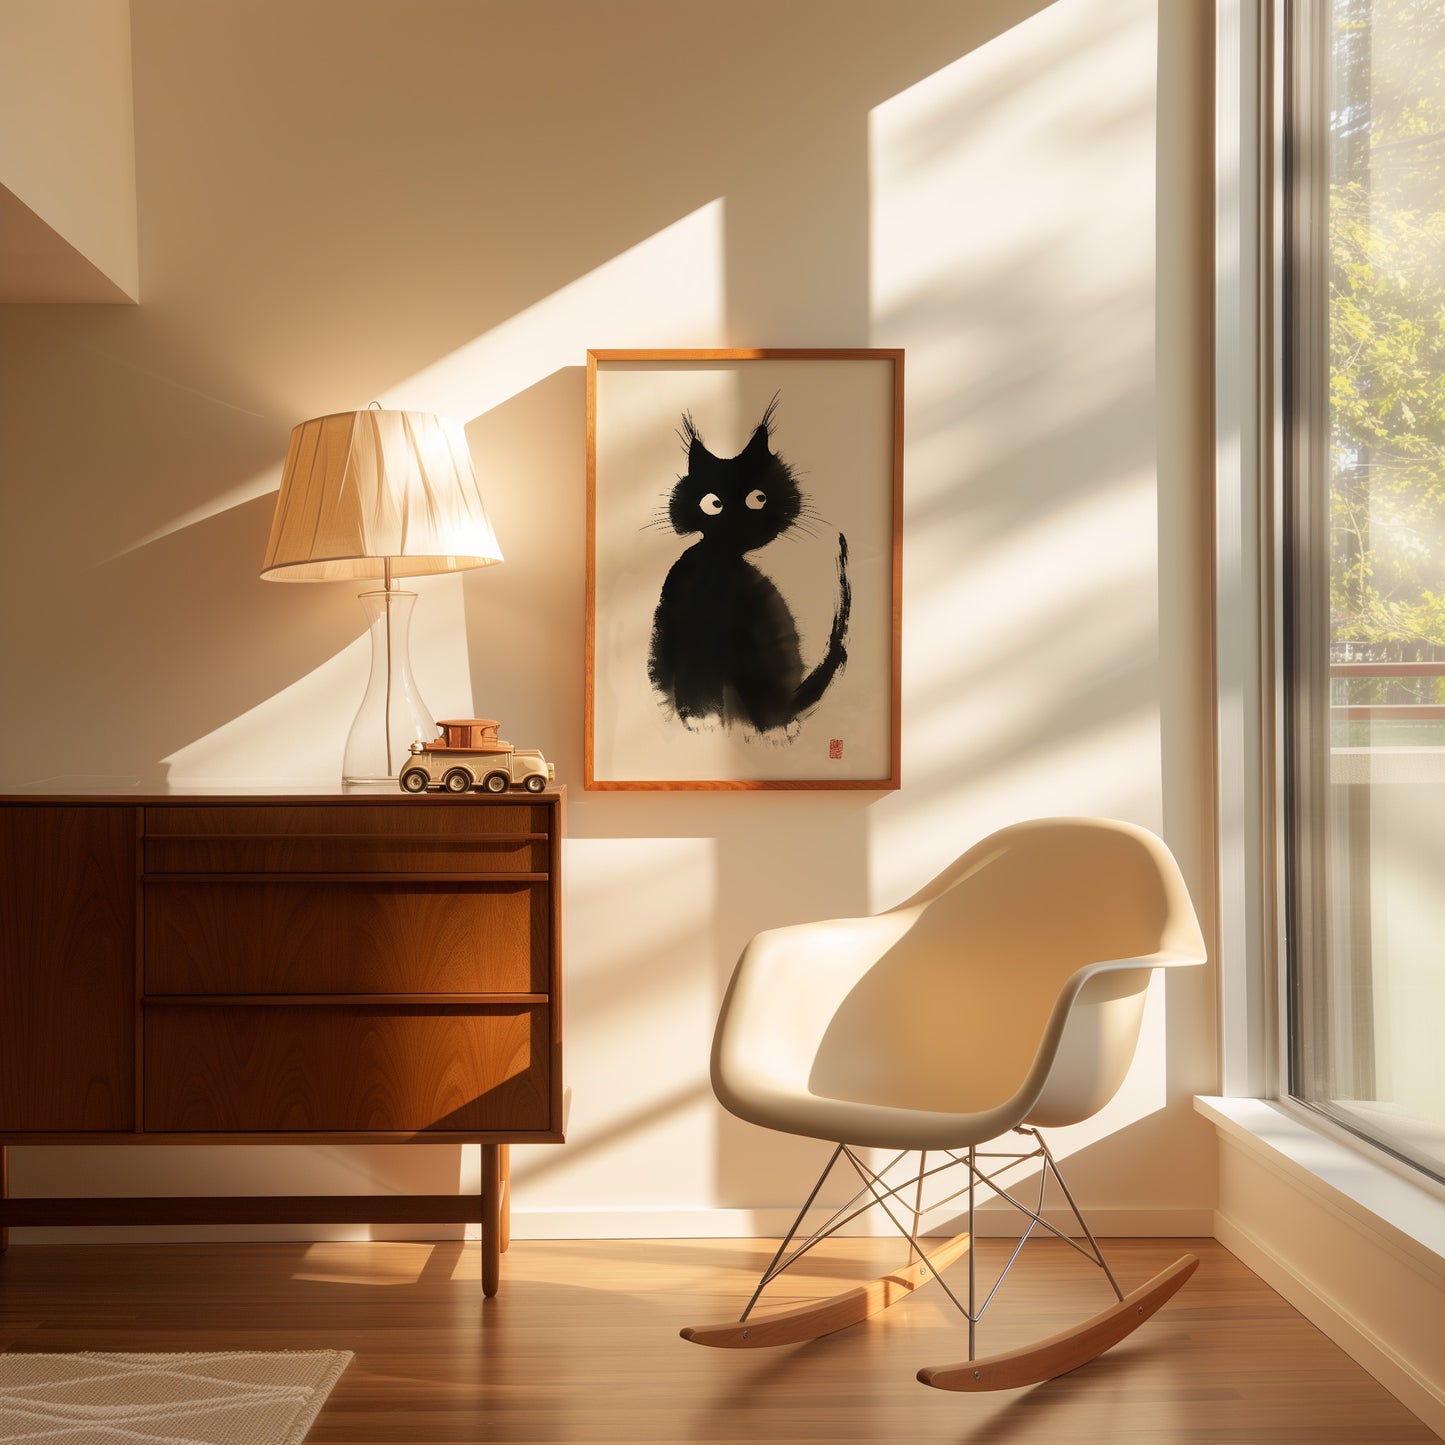 A cozy room with a painting of a black cat, a rocking chair, and a wooden cabinet.